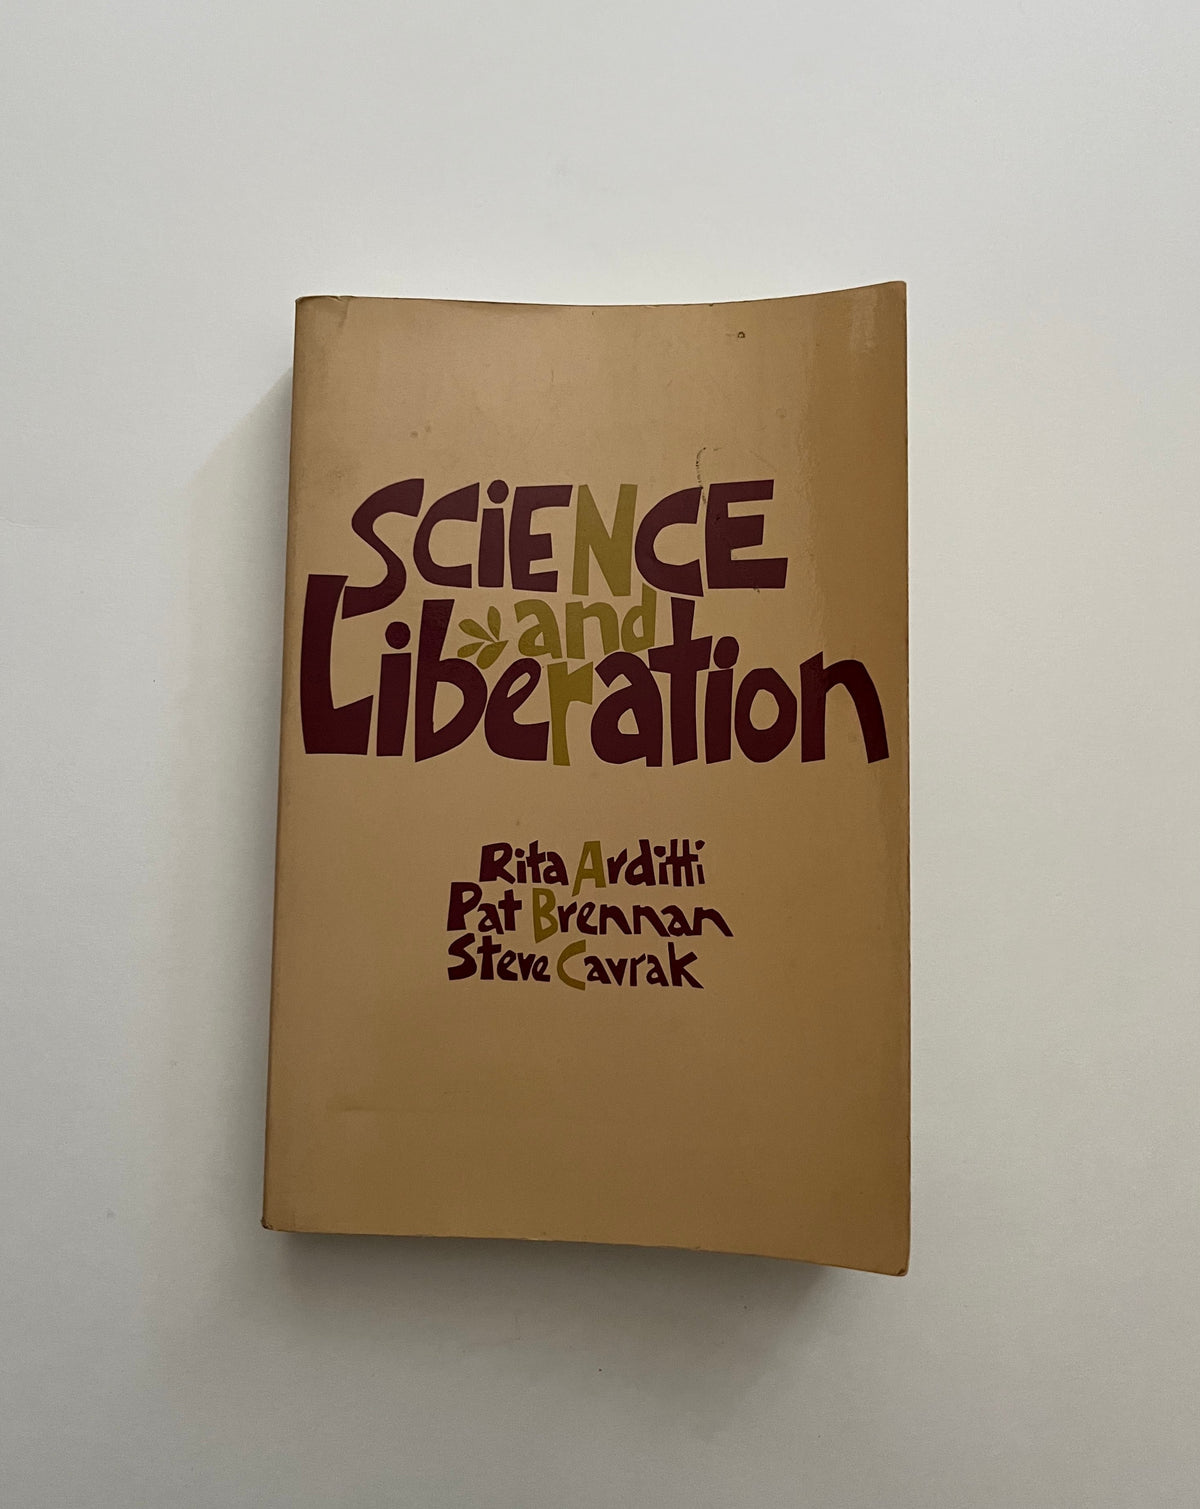 Science and Liberation by Rita Arditti, Pat Brennan, and Steve Cavrak